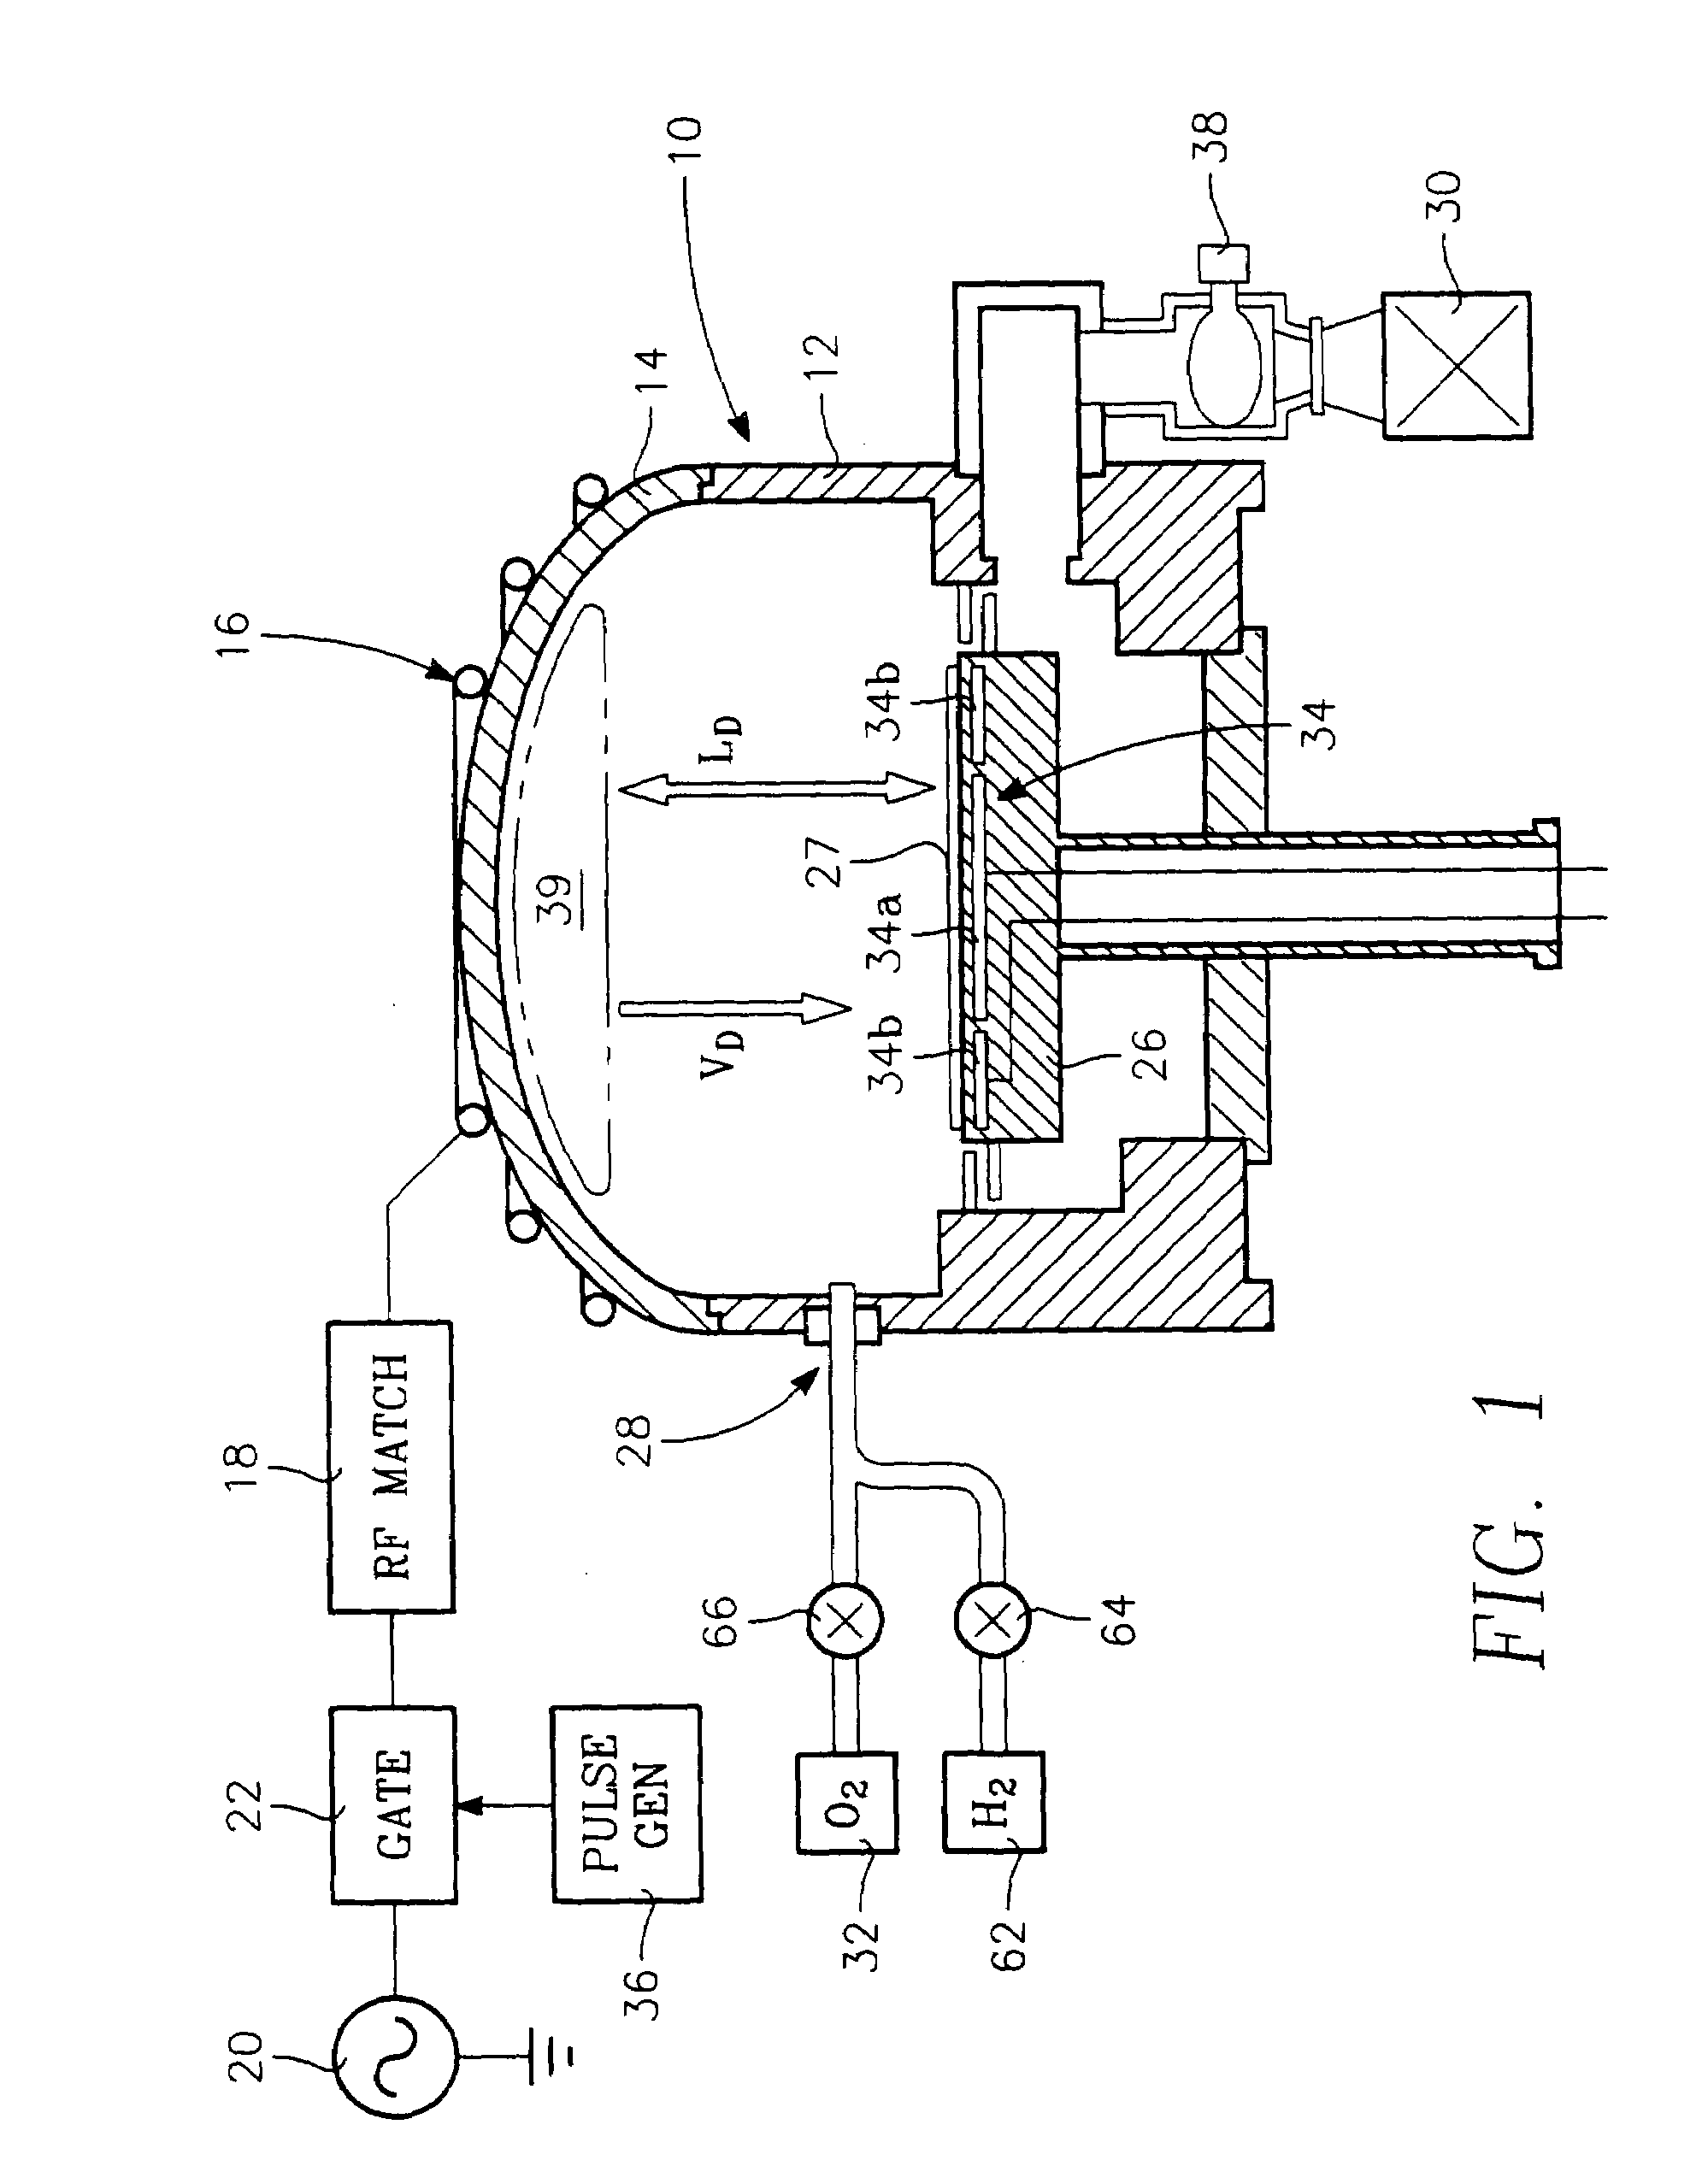 Selective plasma re-oxidation process using pulsed RF source power